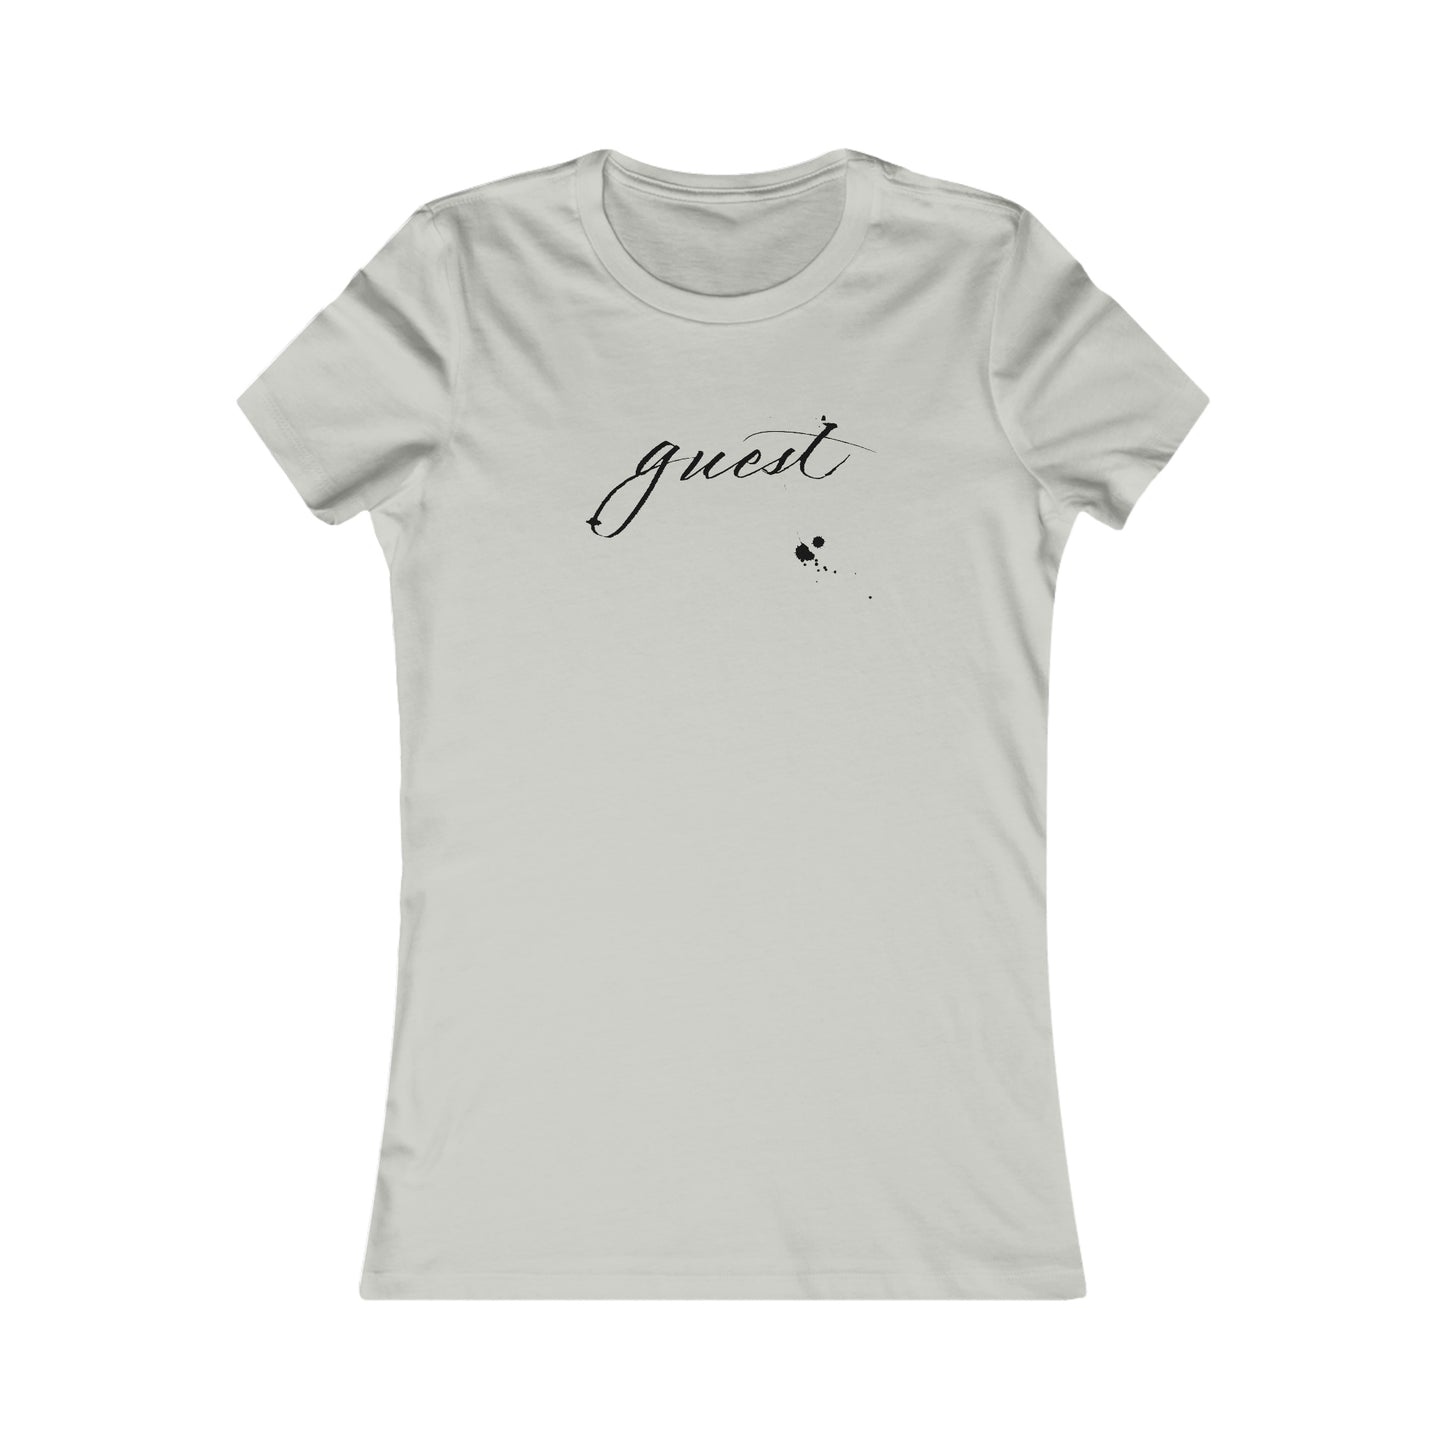 "Guest" Mixed Messages Fitted T-Shirt